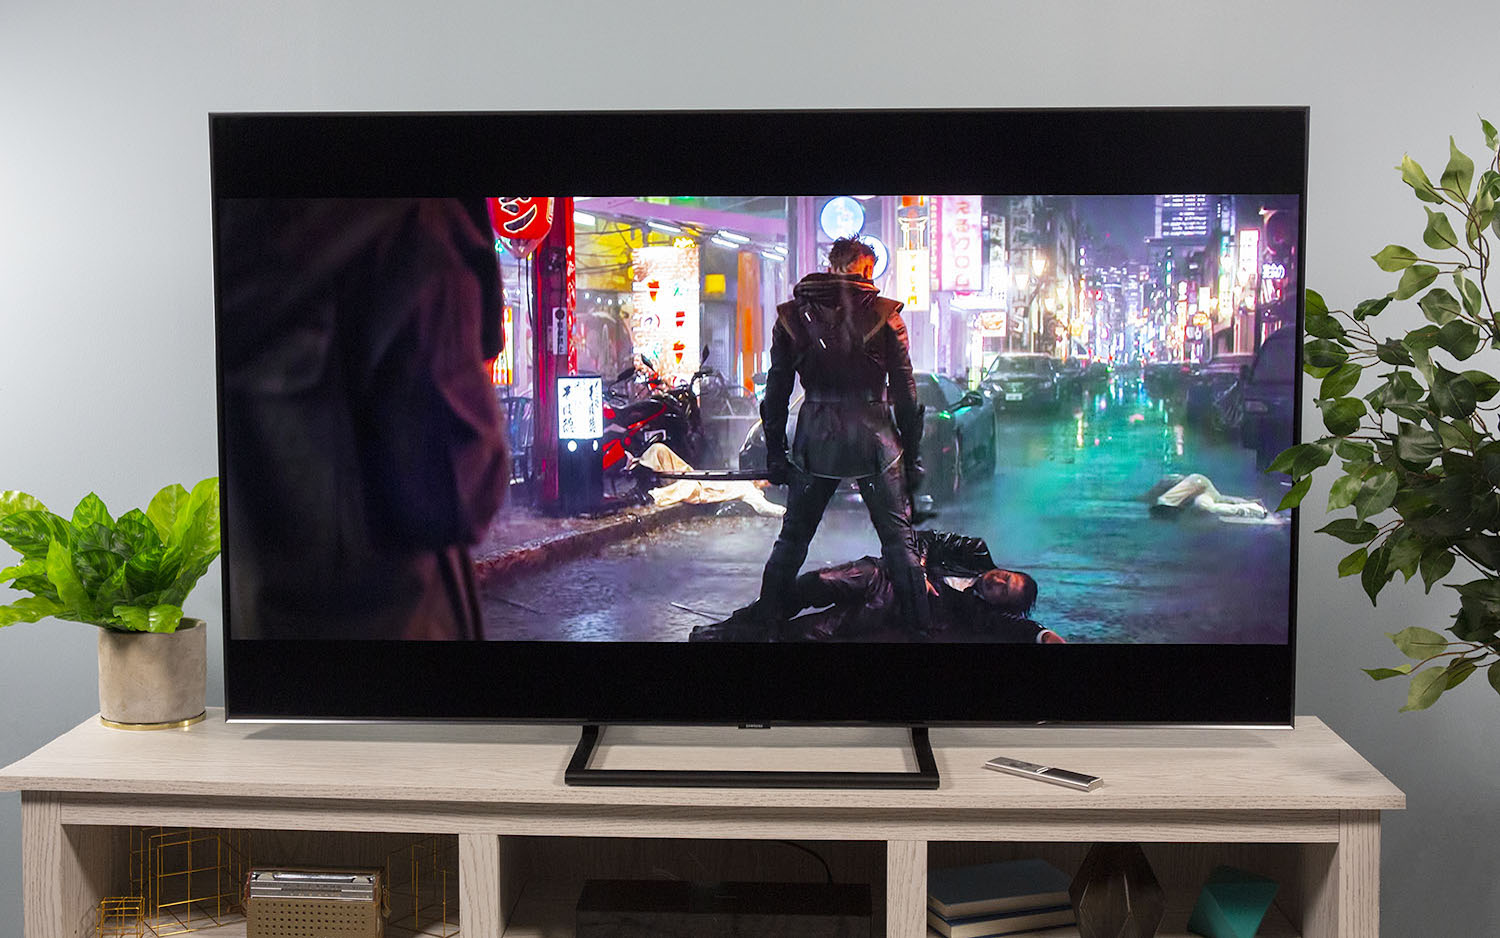 Samsung 65-inch Q9FN QLED TV - Full Review and Benchmarks Tom's Guide | Tom's Guide